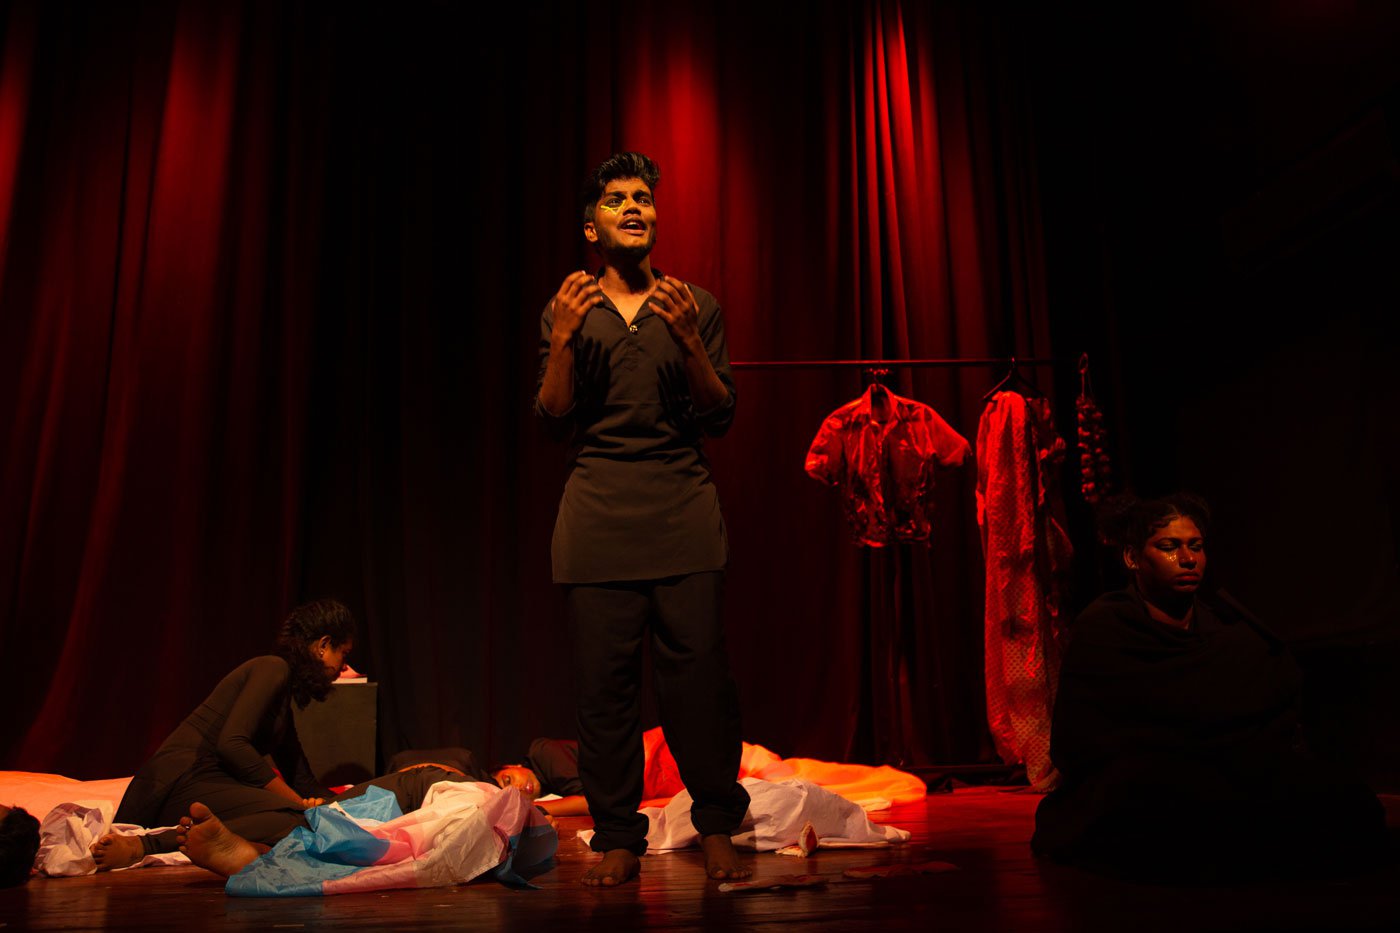 Rizwan S. plays the role of a trans man and depicts his experience of love, dejection and pain in a heteronormative society